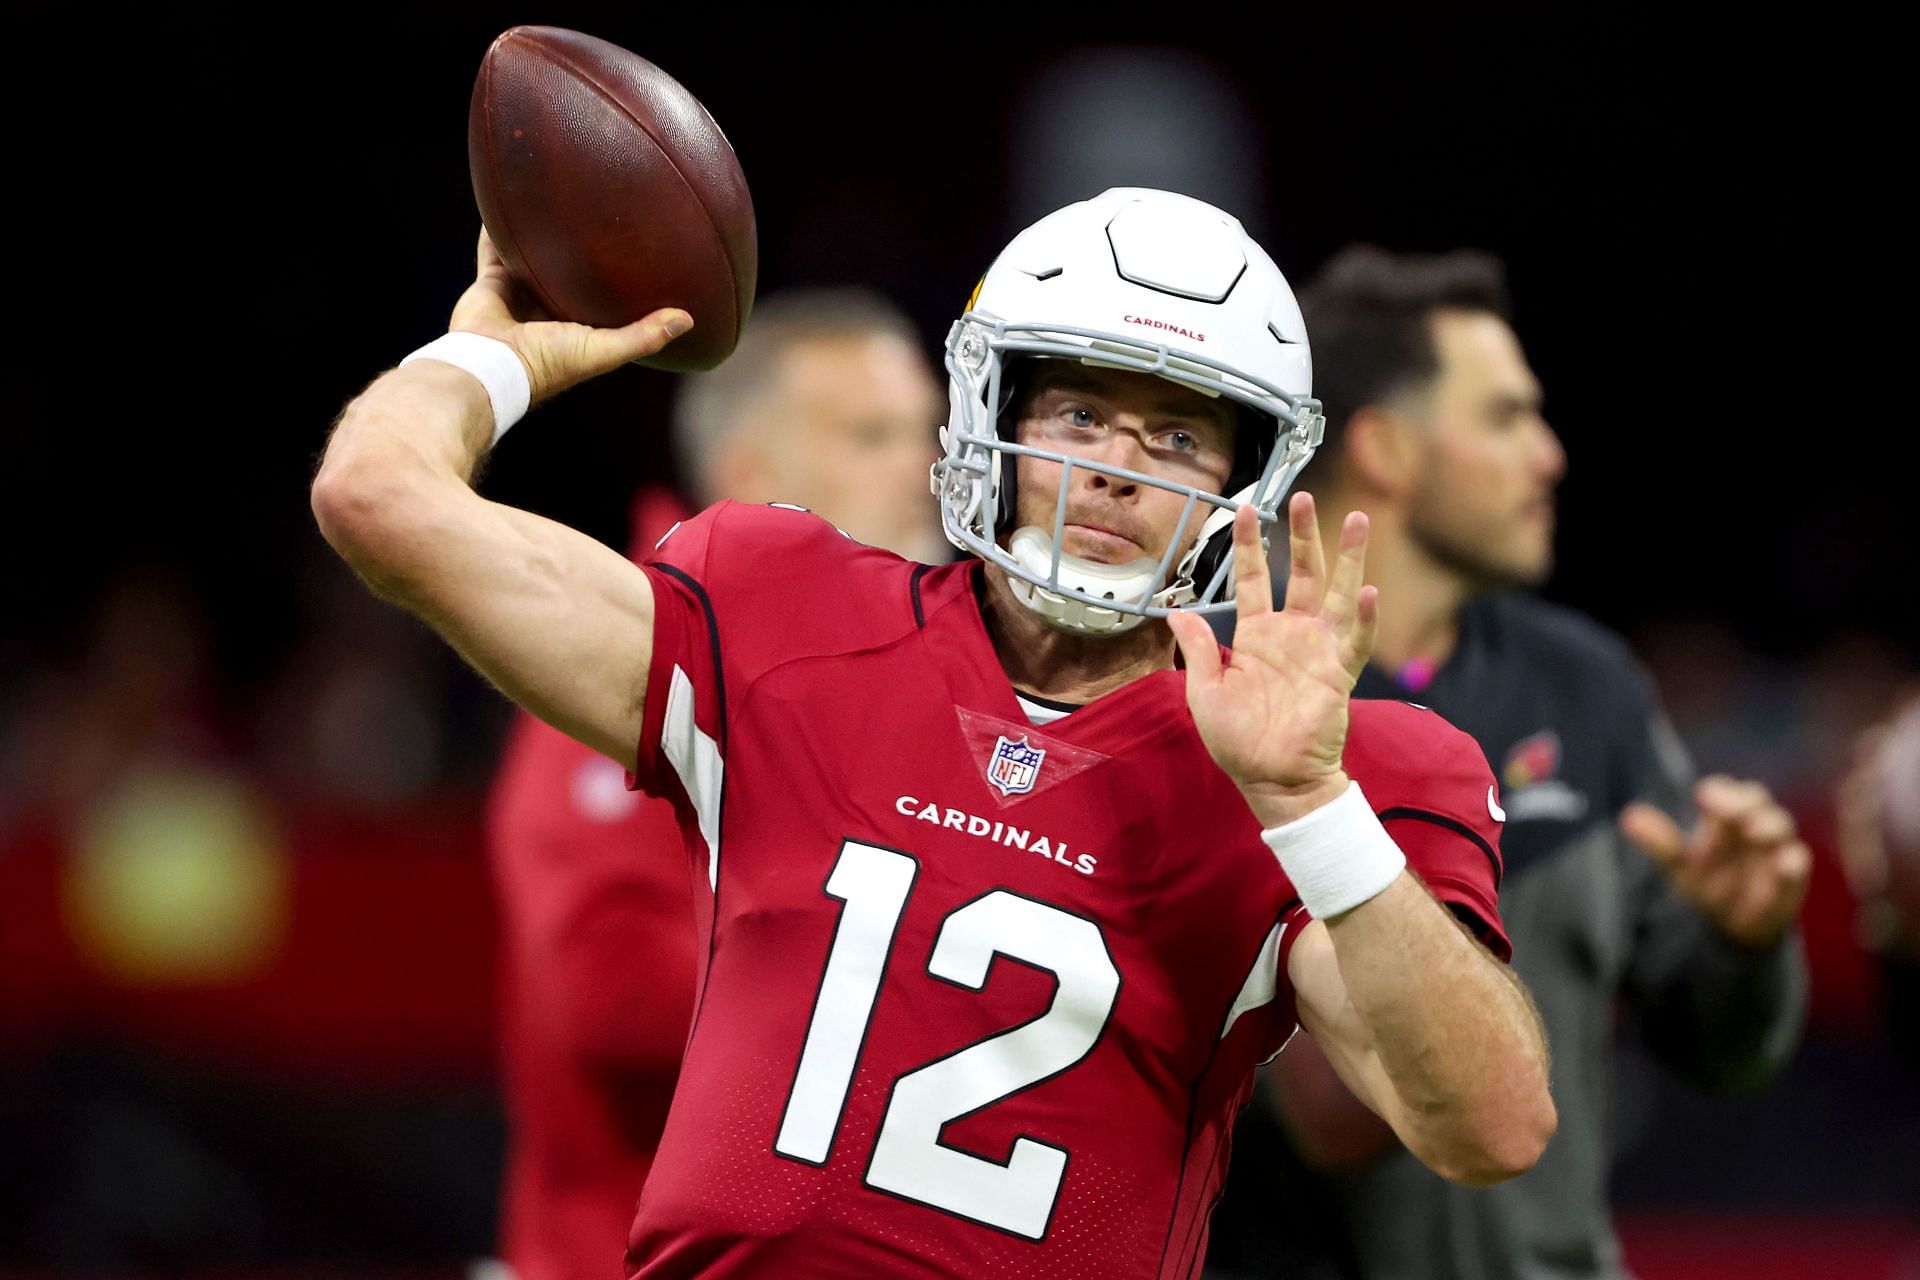 The Arizona Cardinals removal of Colt McCoy is still puzzling